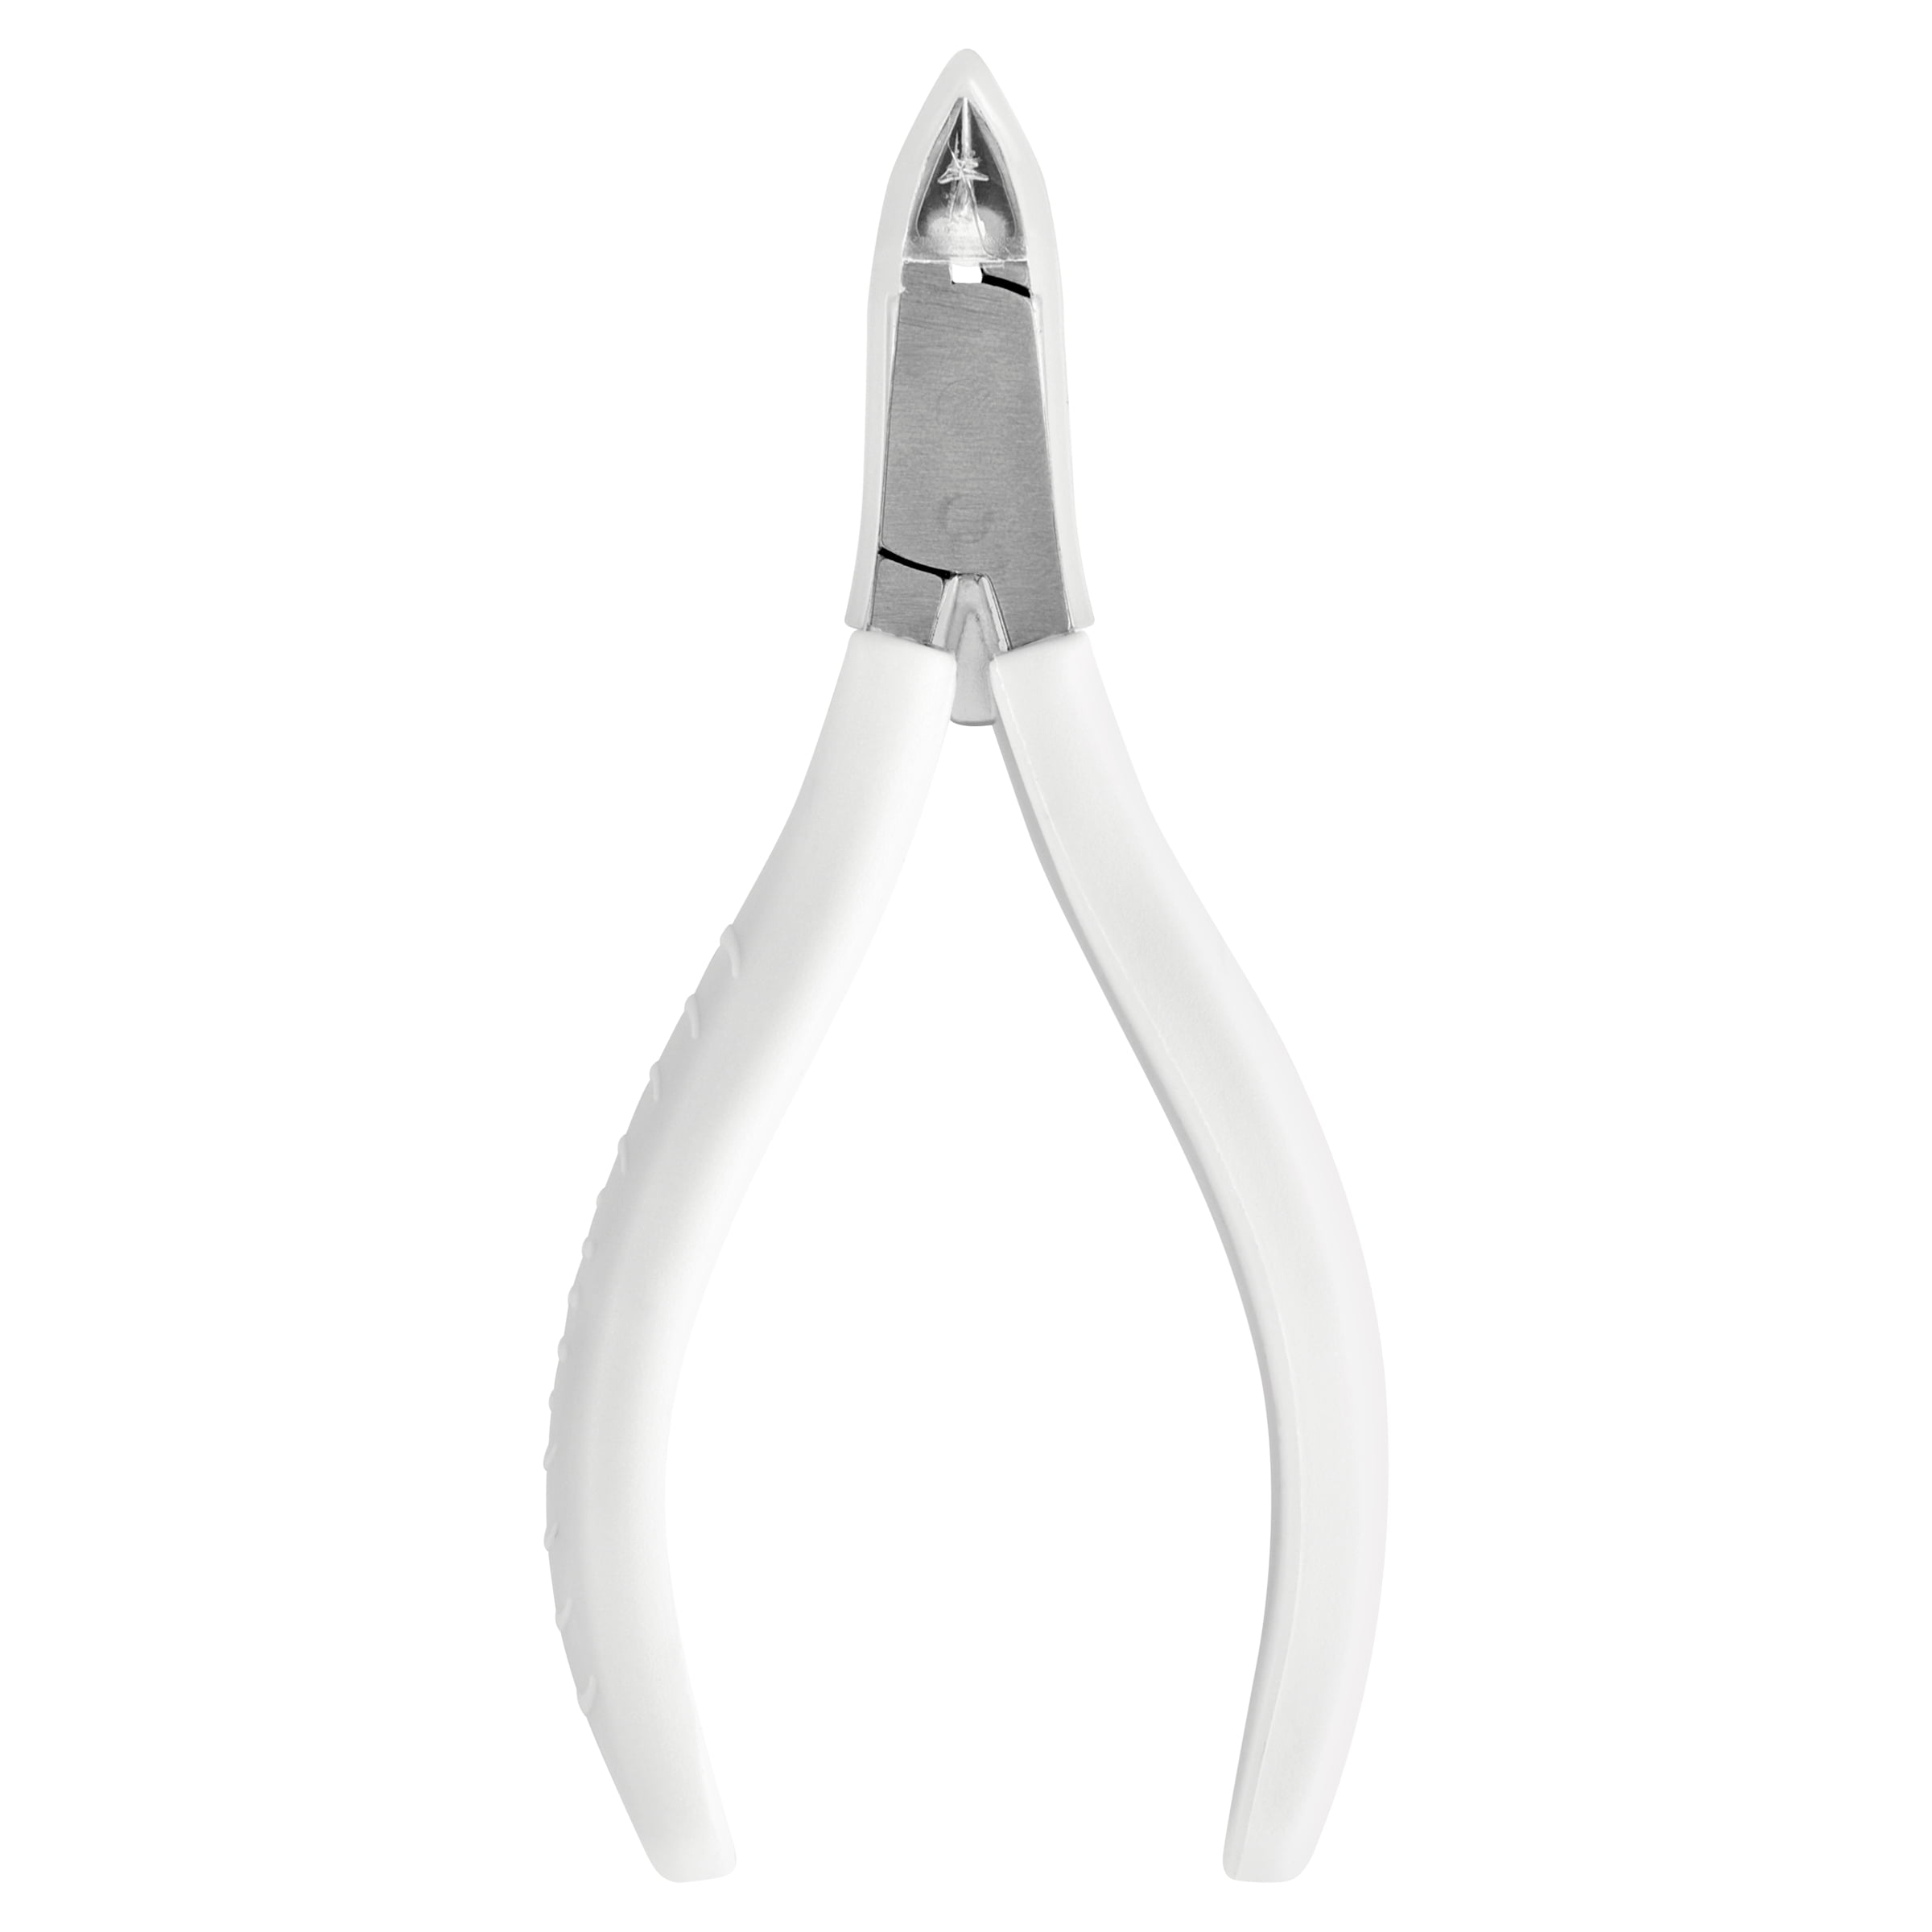 Equate Beauty Stainless Steel Non-Slip Easy Grip Cuticle Nipper